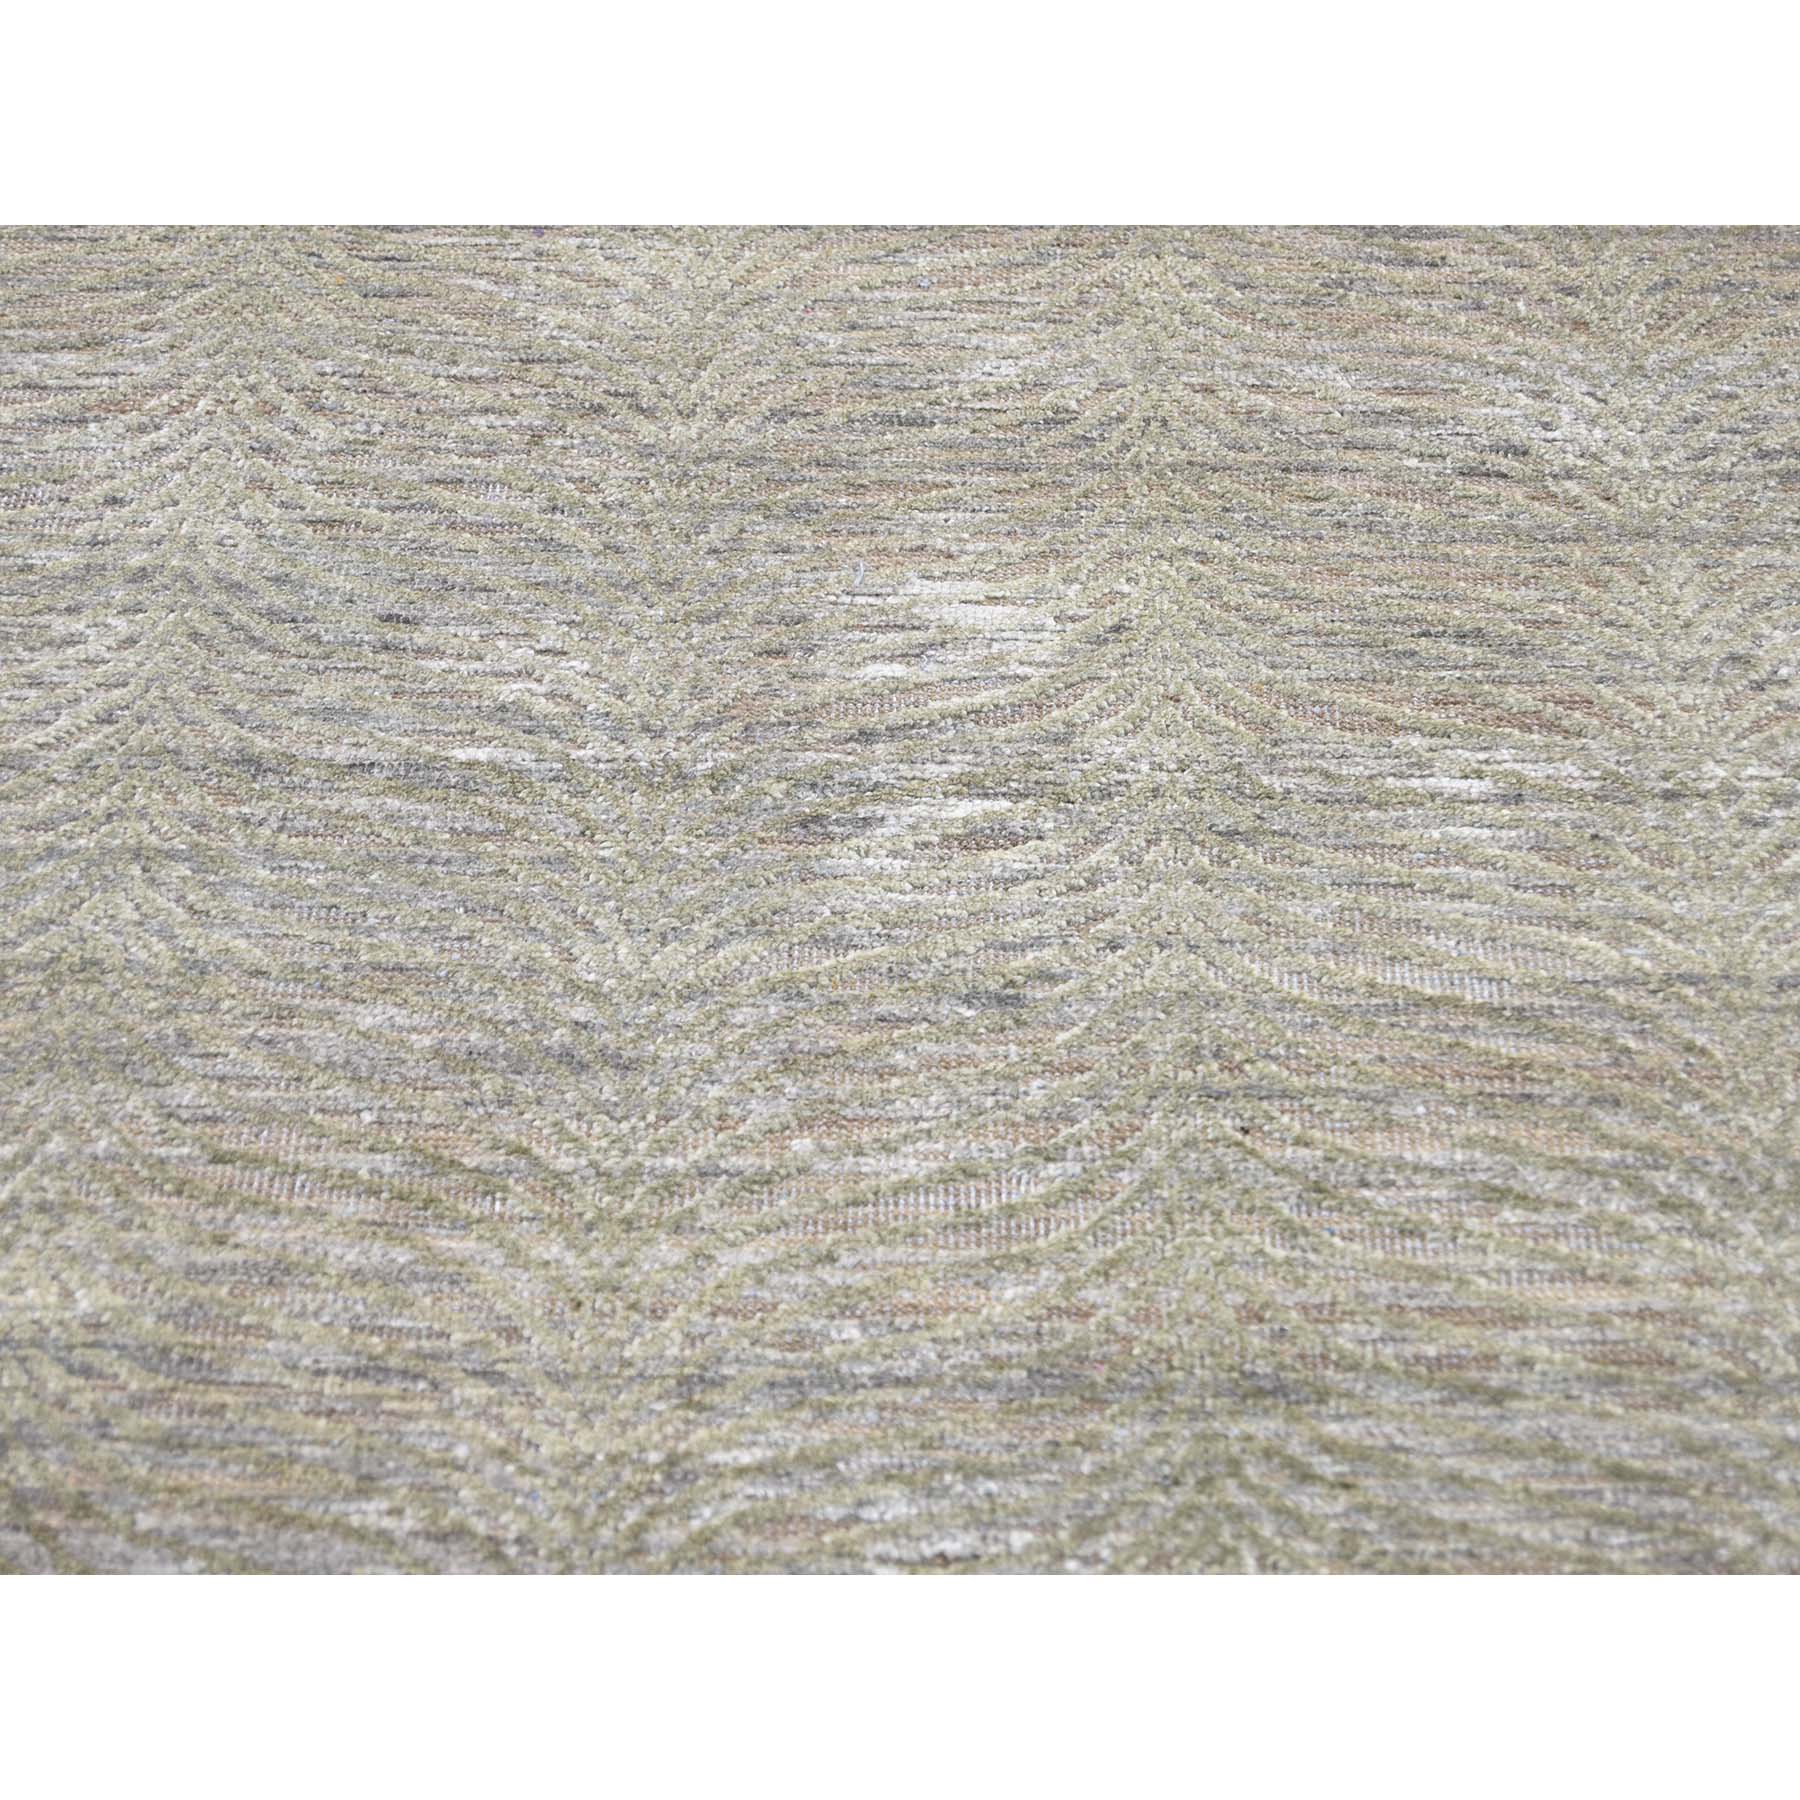 9'x12' Real Silk with Textured Wool Tone on Tone Hand Woven Oriental Rug 